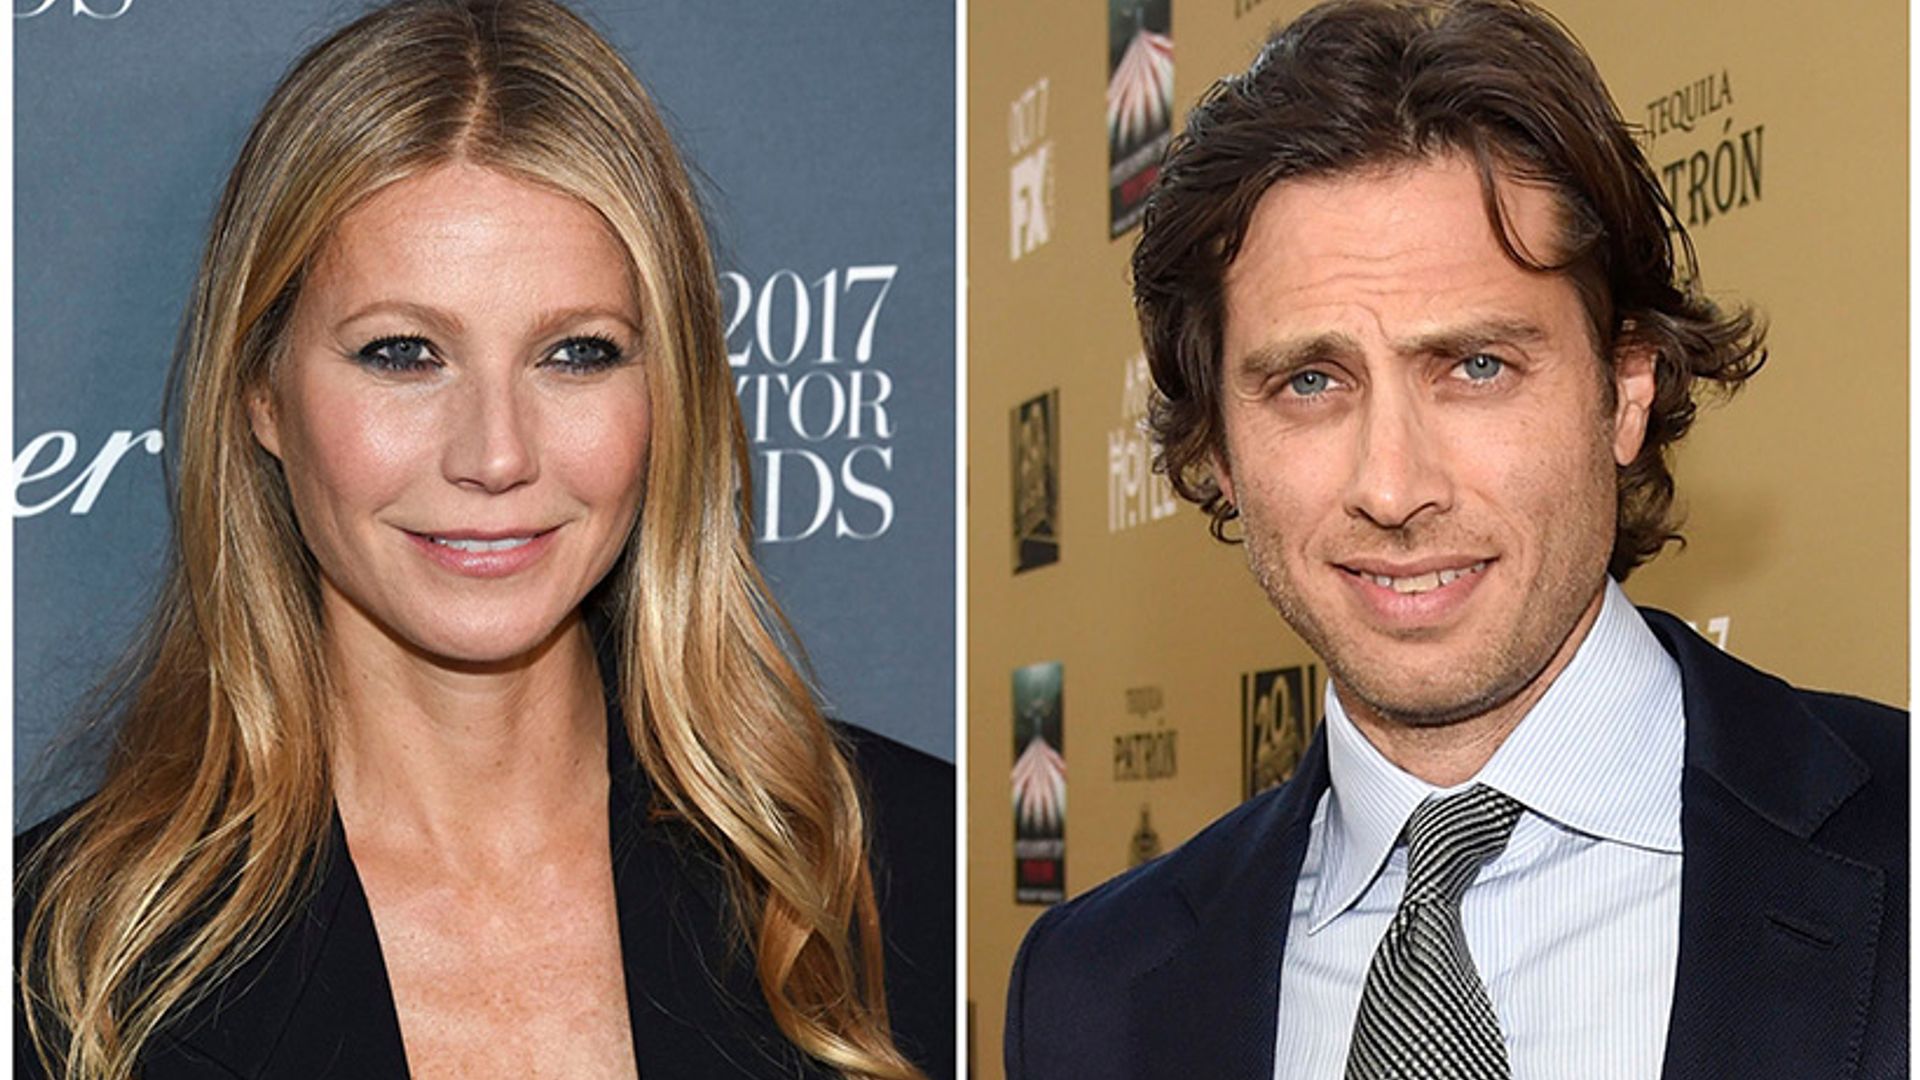 Gwyneth Paltrow shares first photo of stunning wedding day – see her amazing dress